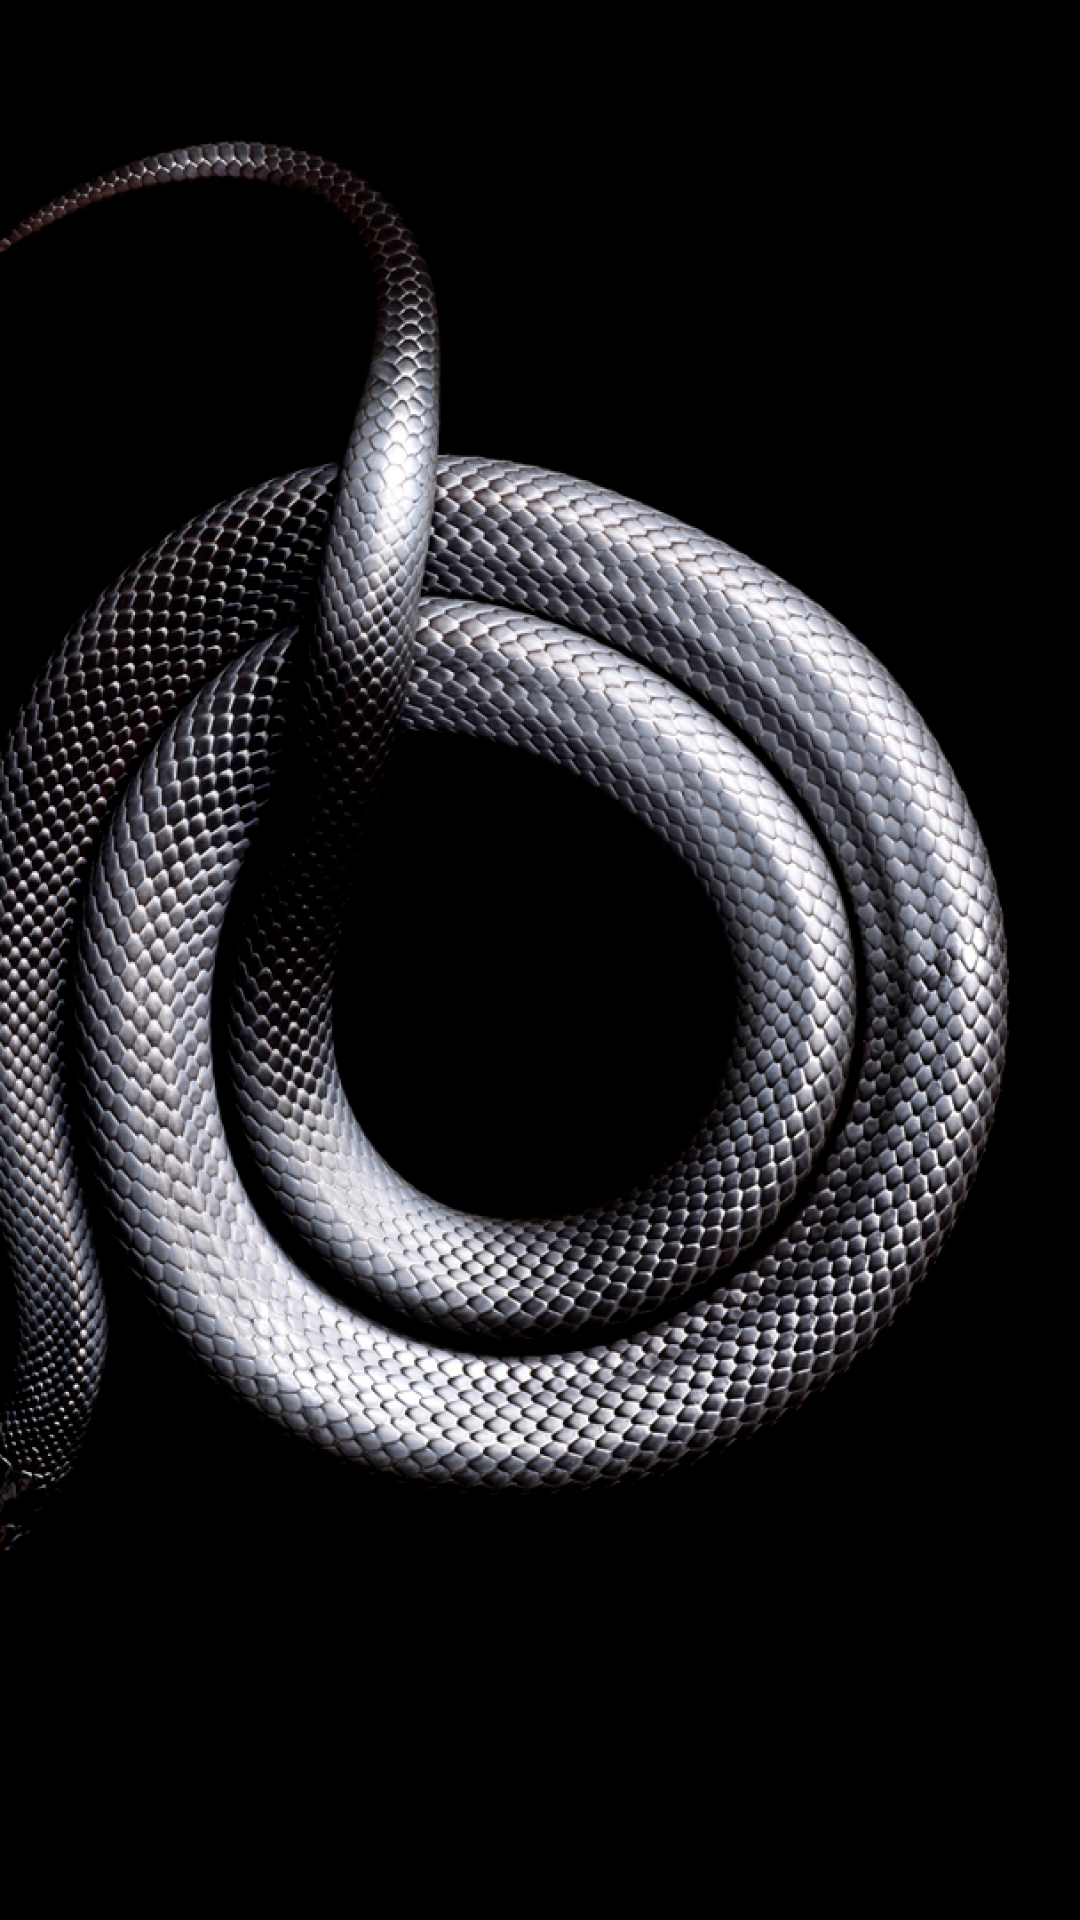 snake wallpaper,snake,reptile,scaled reptile,colubridae,black and white